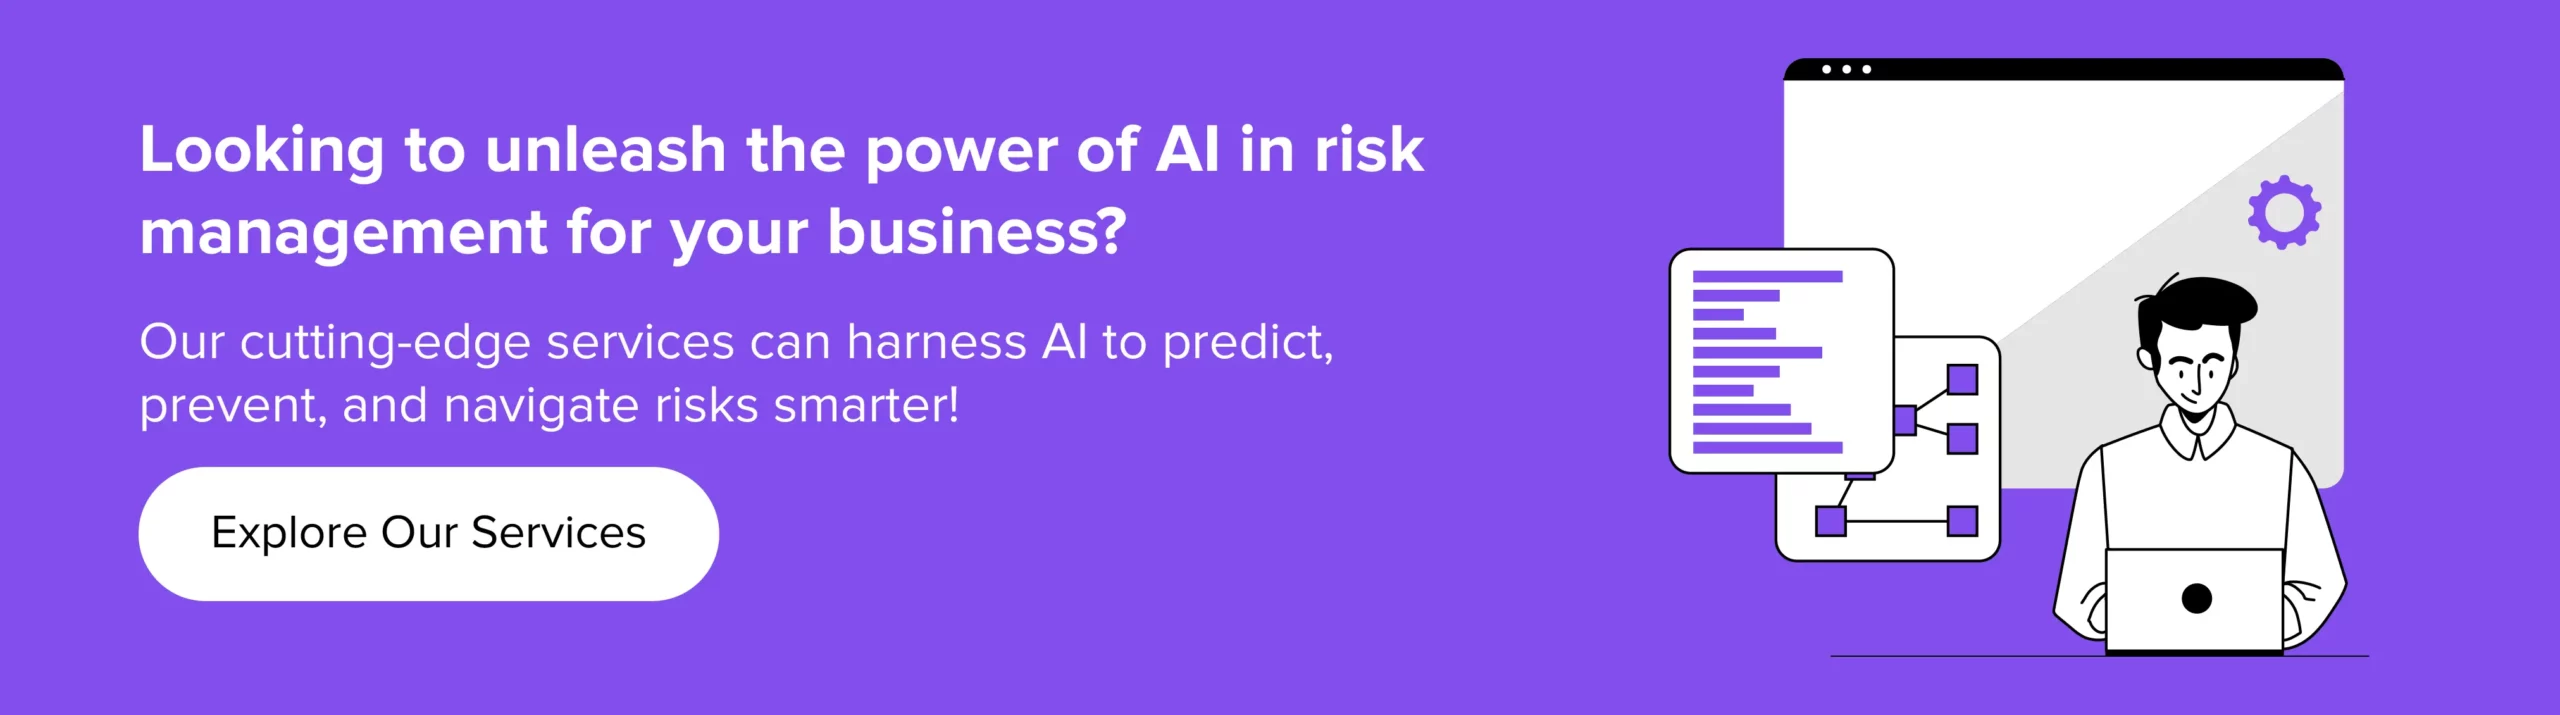 AI in risk management for your business